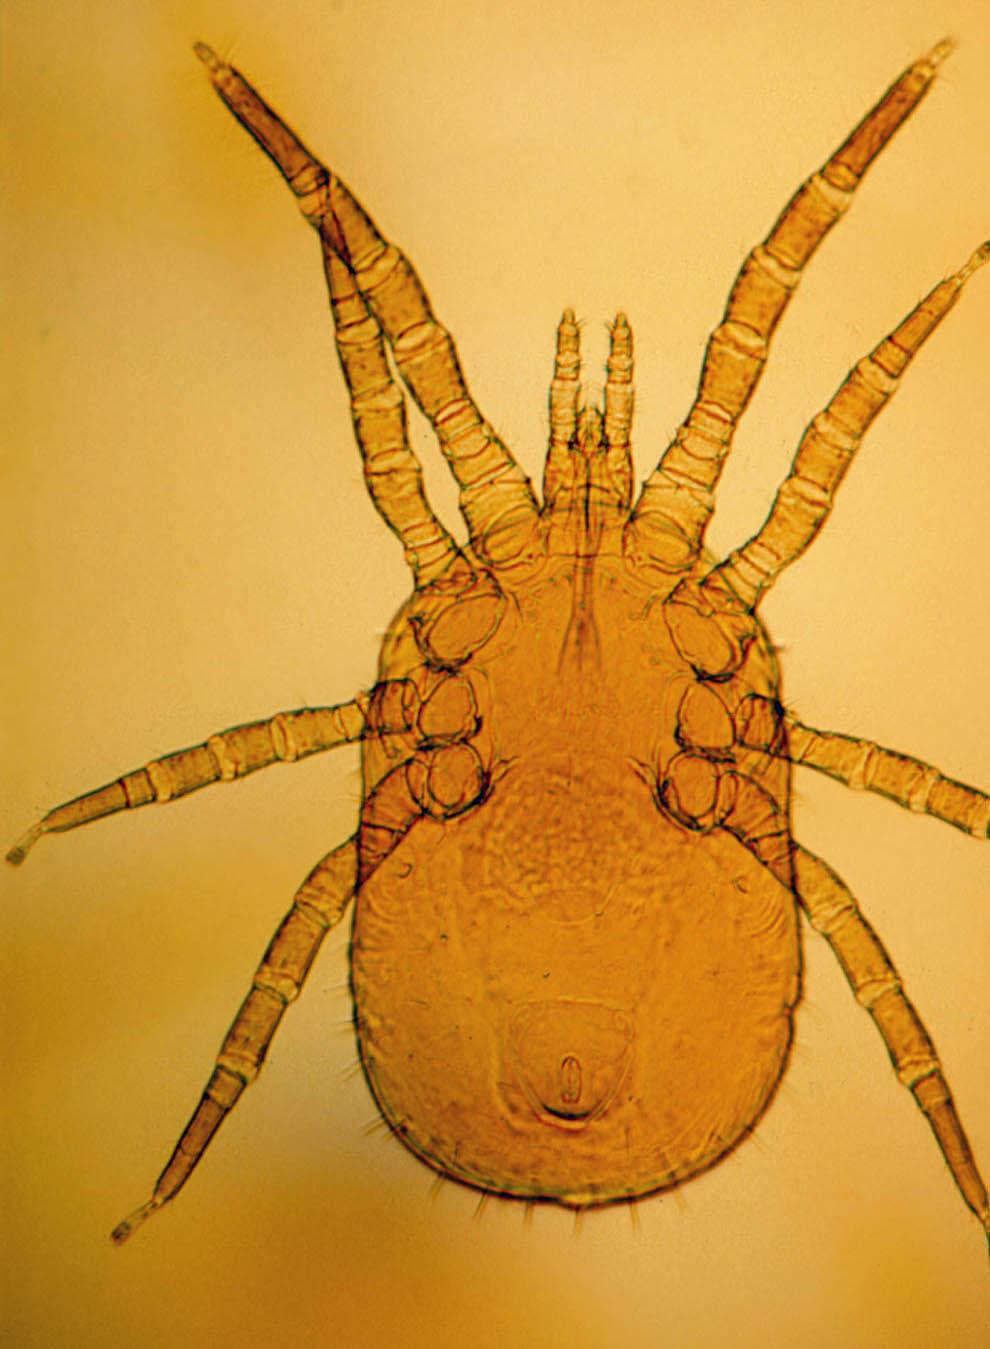 The mites will also bite man, causing itching and irritation to the skin.